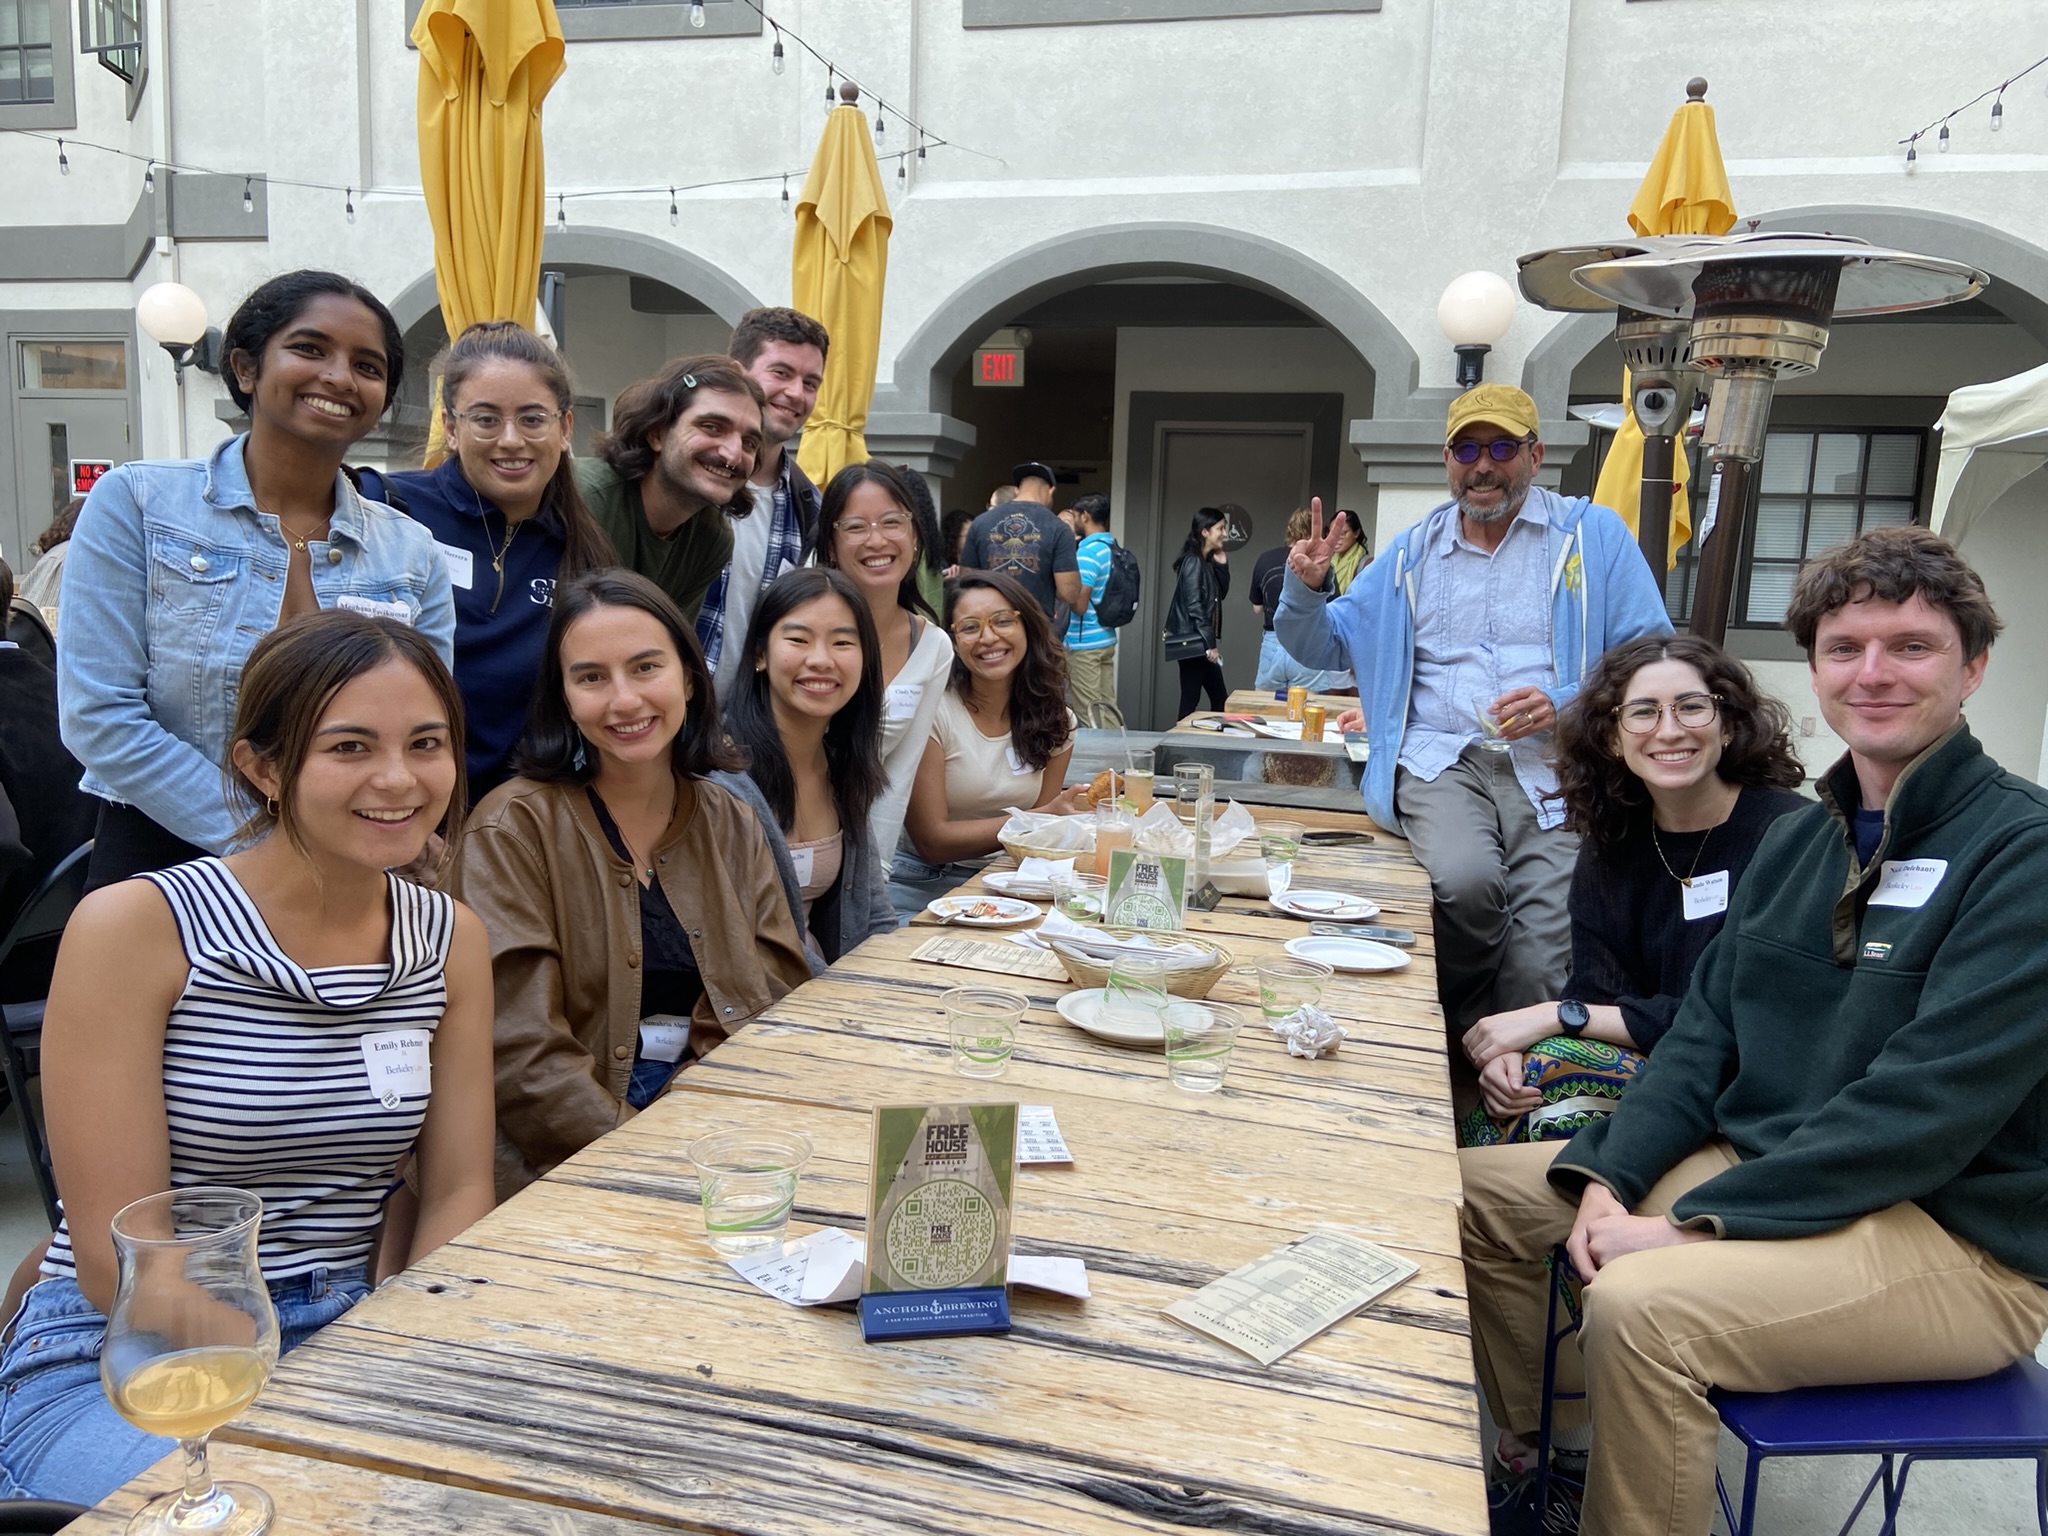 Outside at a local restaurant, the Berkeley Law Public Interest Scholars smile for the camera with faculty mentor, Jonathan Simon.